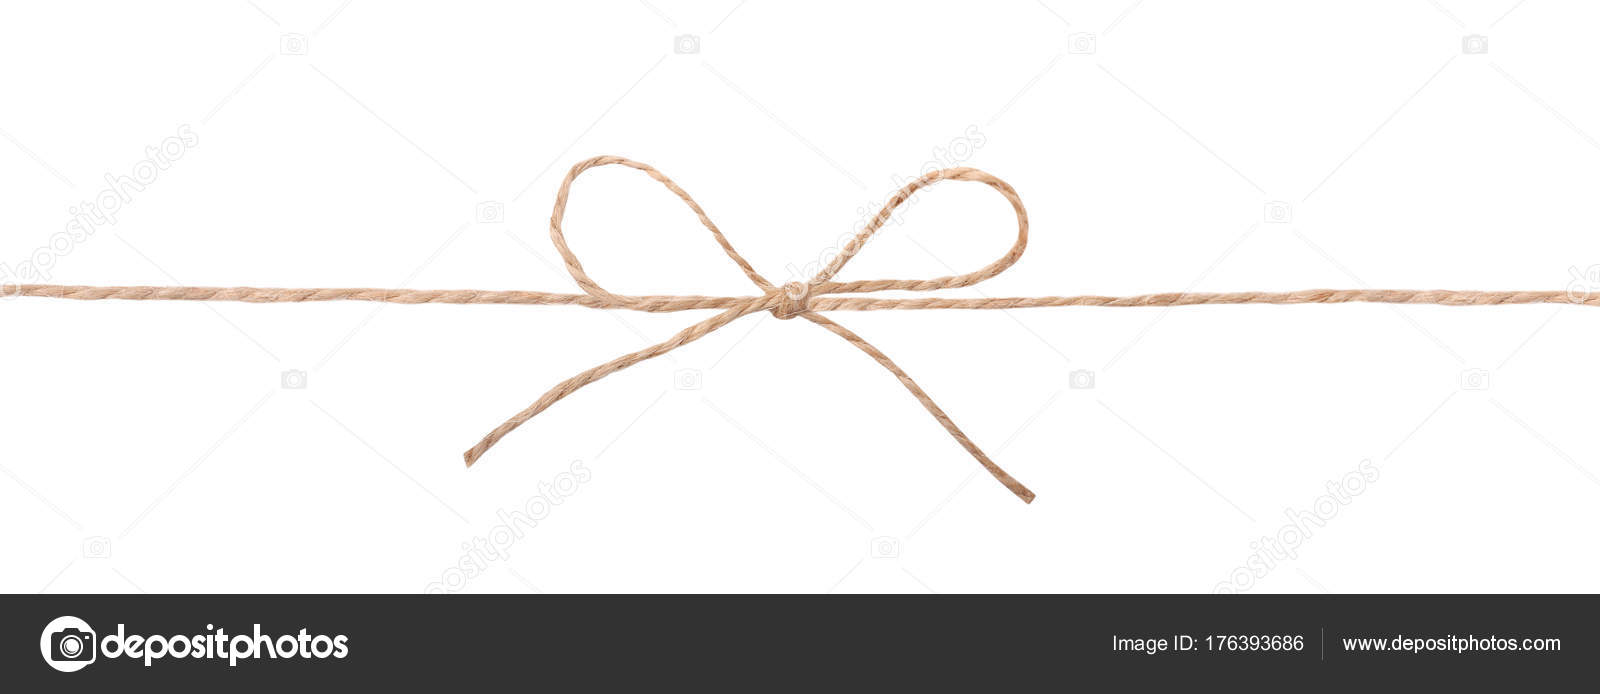 String twine rope bow isolated on white. — Stock Photo © NYS #176393686